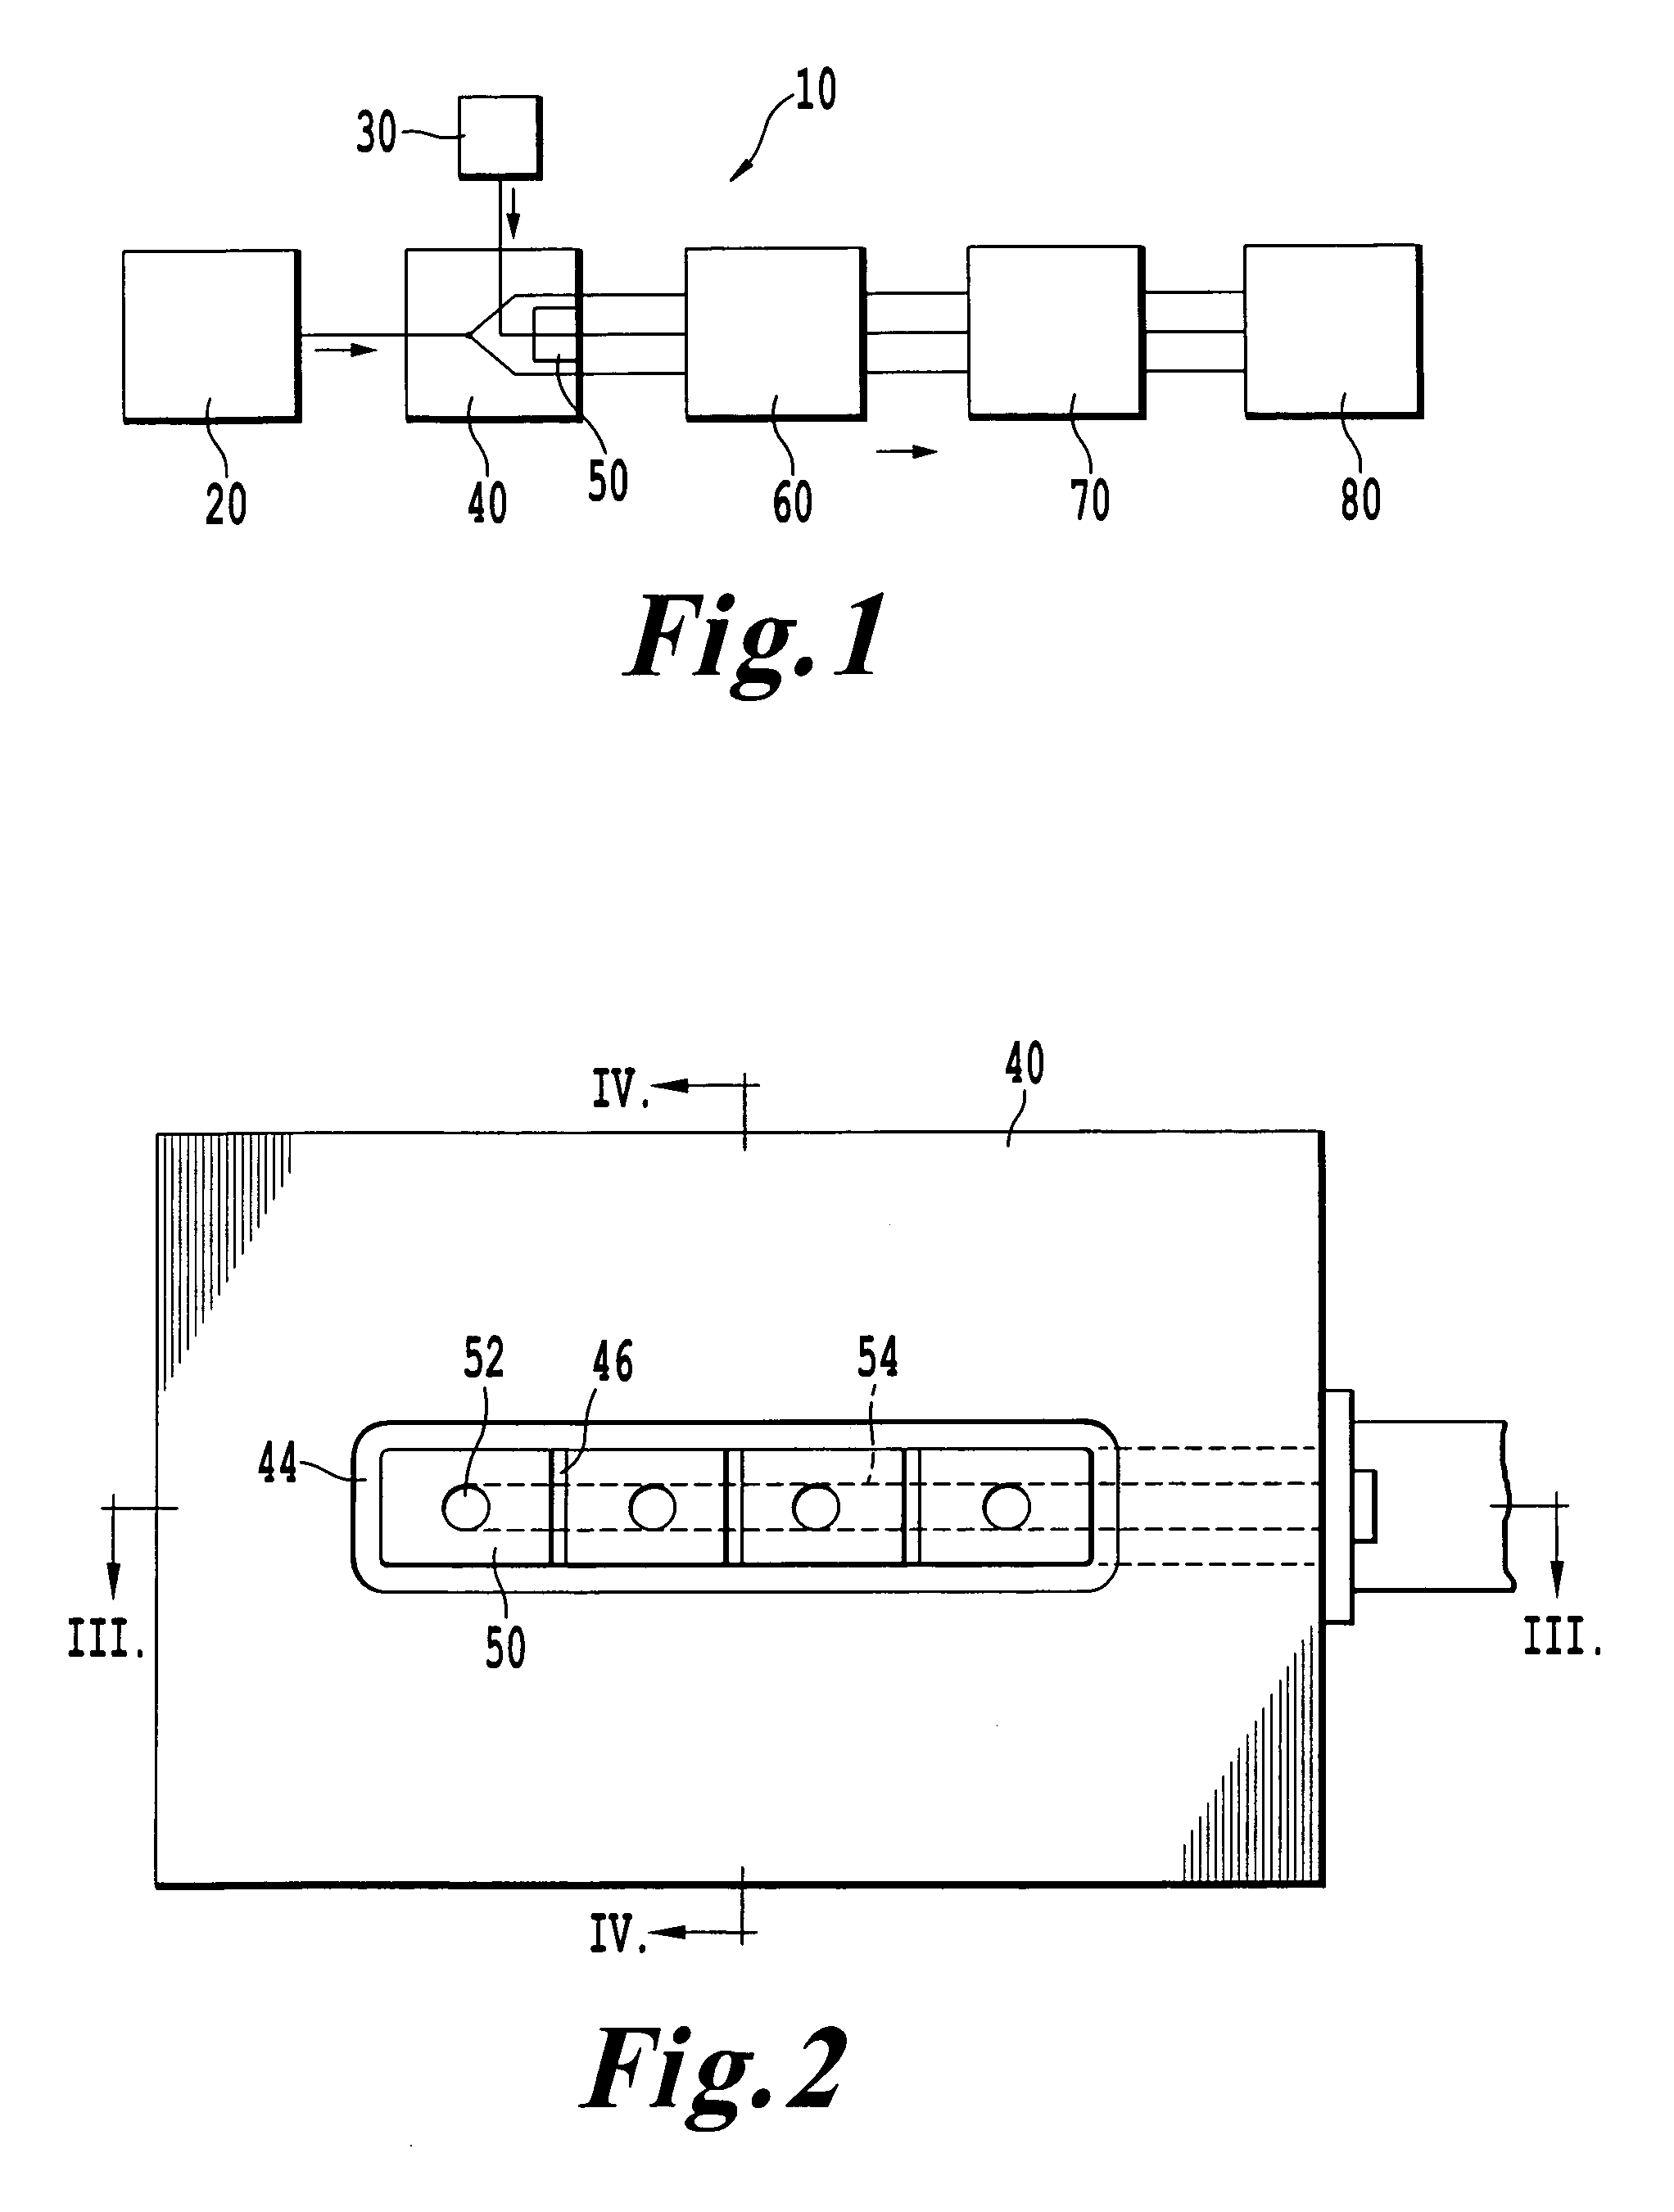 Extrusion/reaction injection molding system